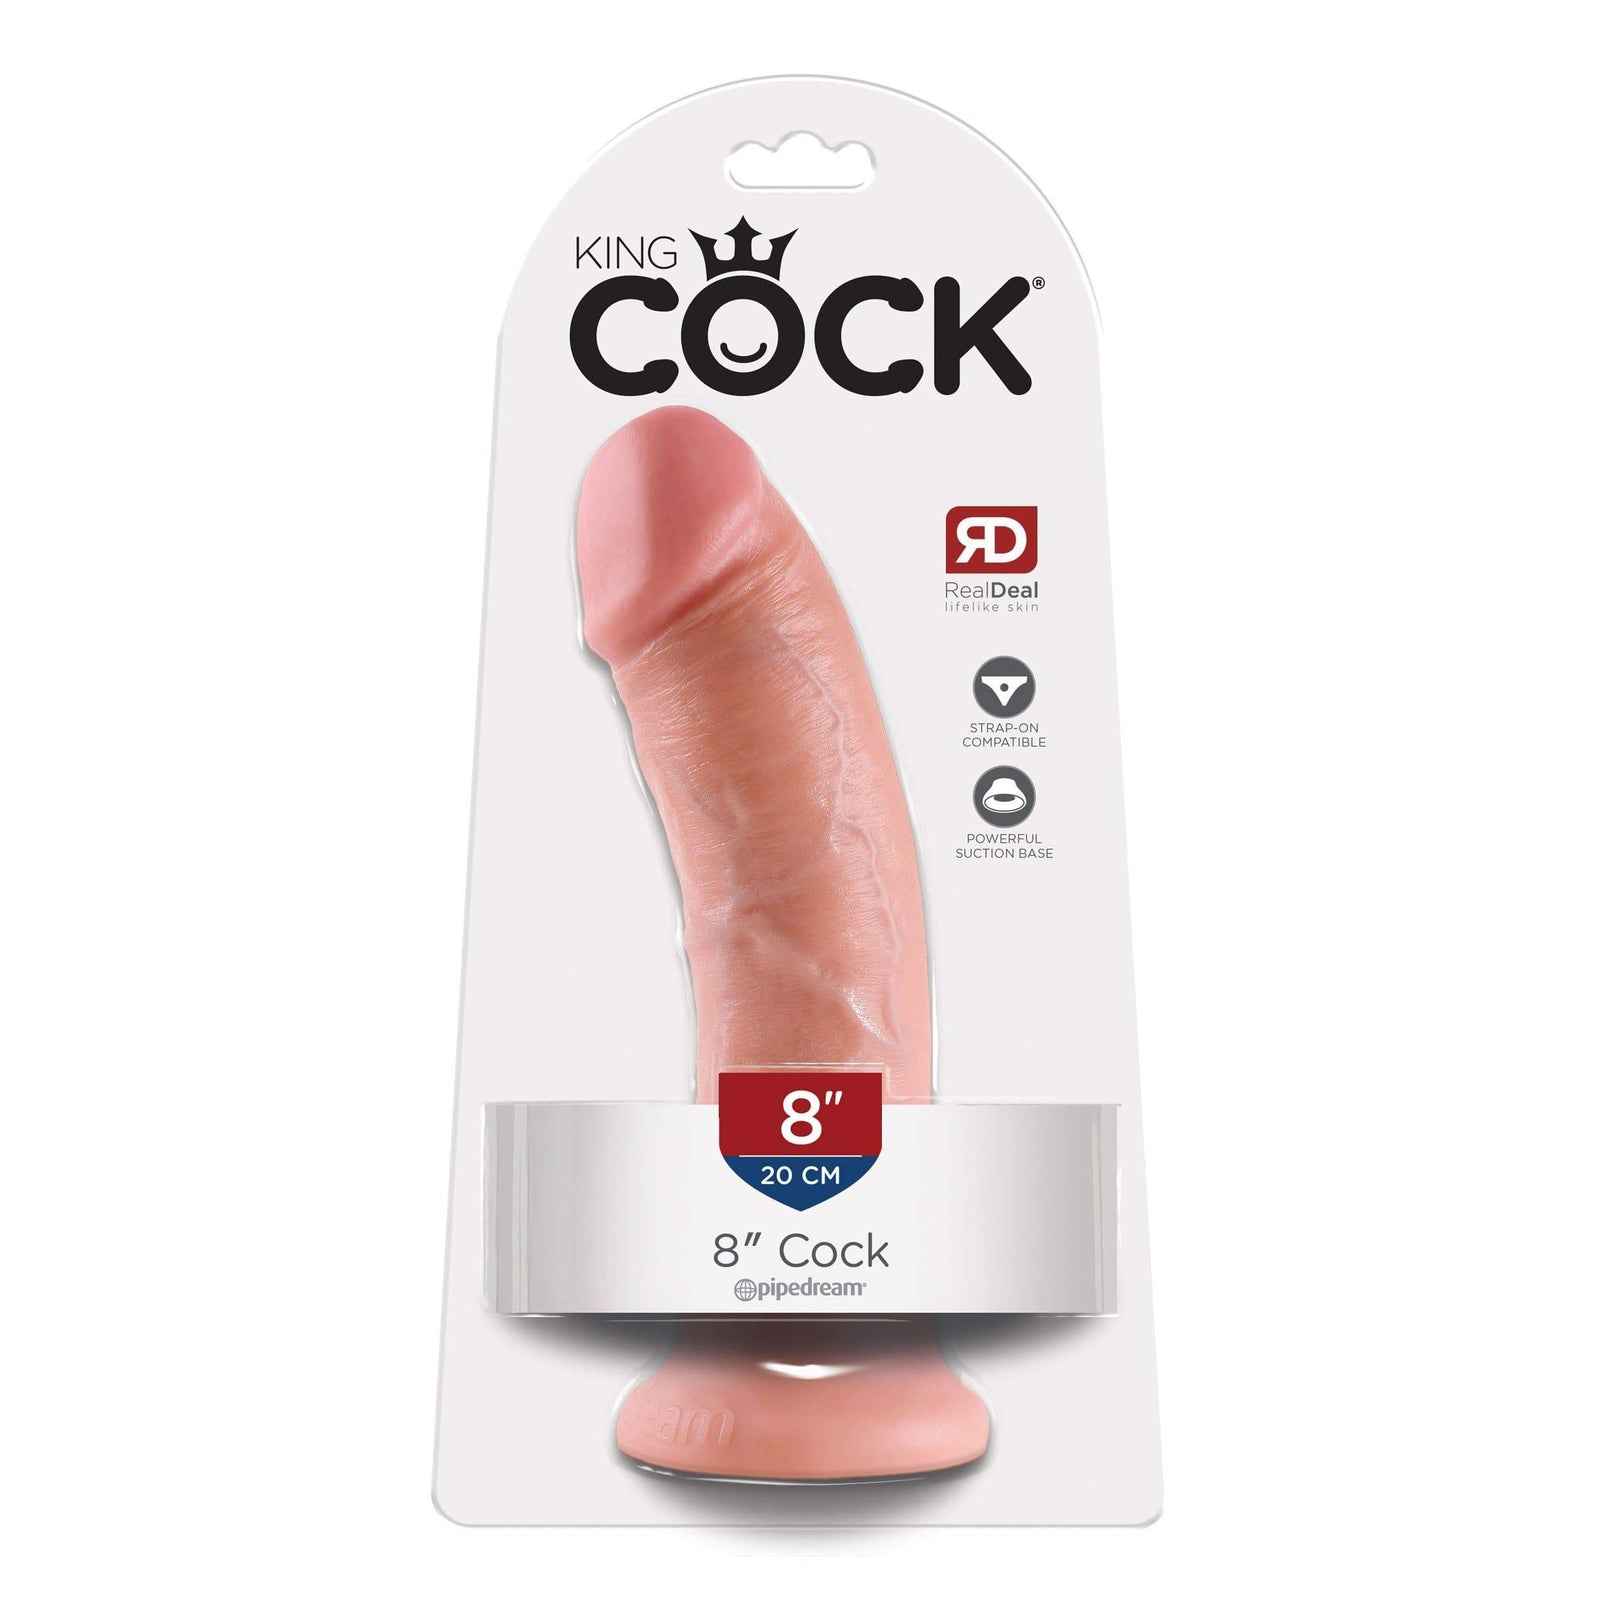 Pipedream - King Cock Dildo 8" (Beige) Realistic Dildo with suction cup (Non Vibration) 603912349948 CherryAffairs